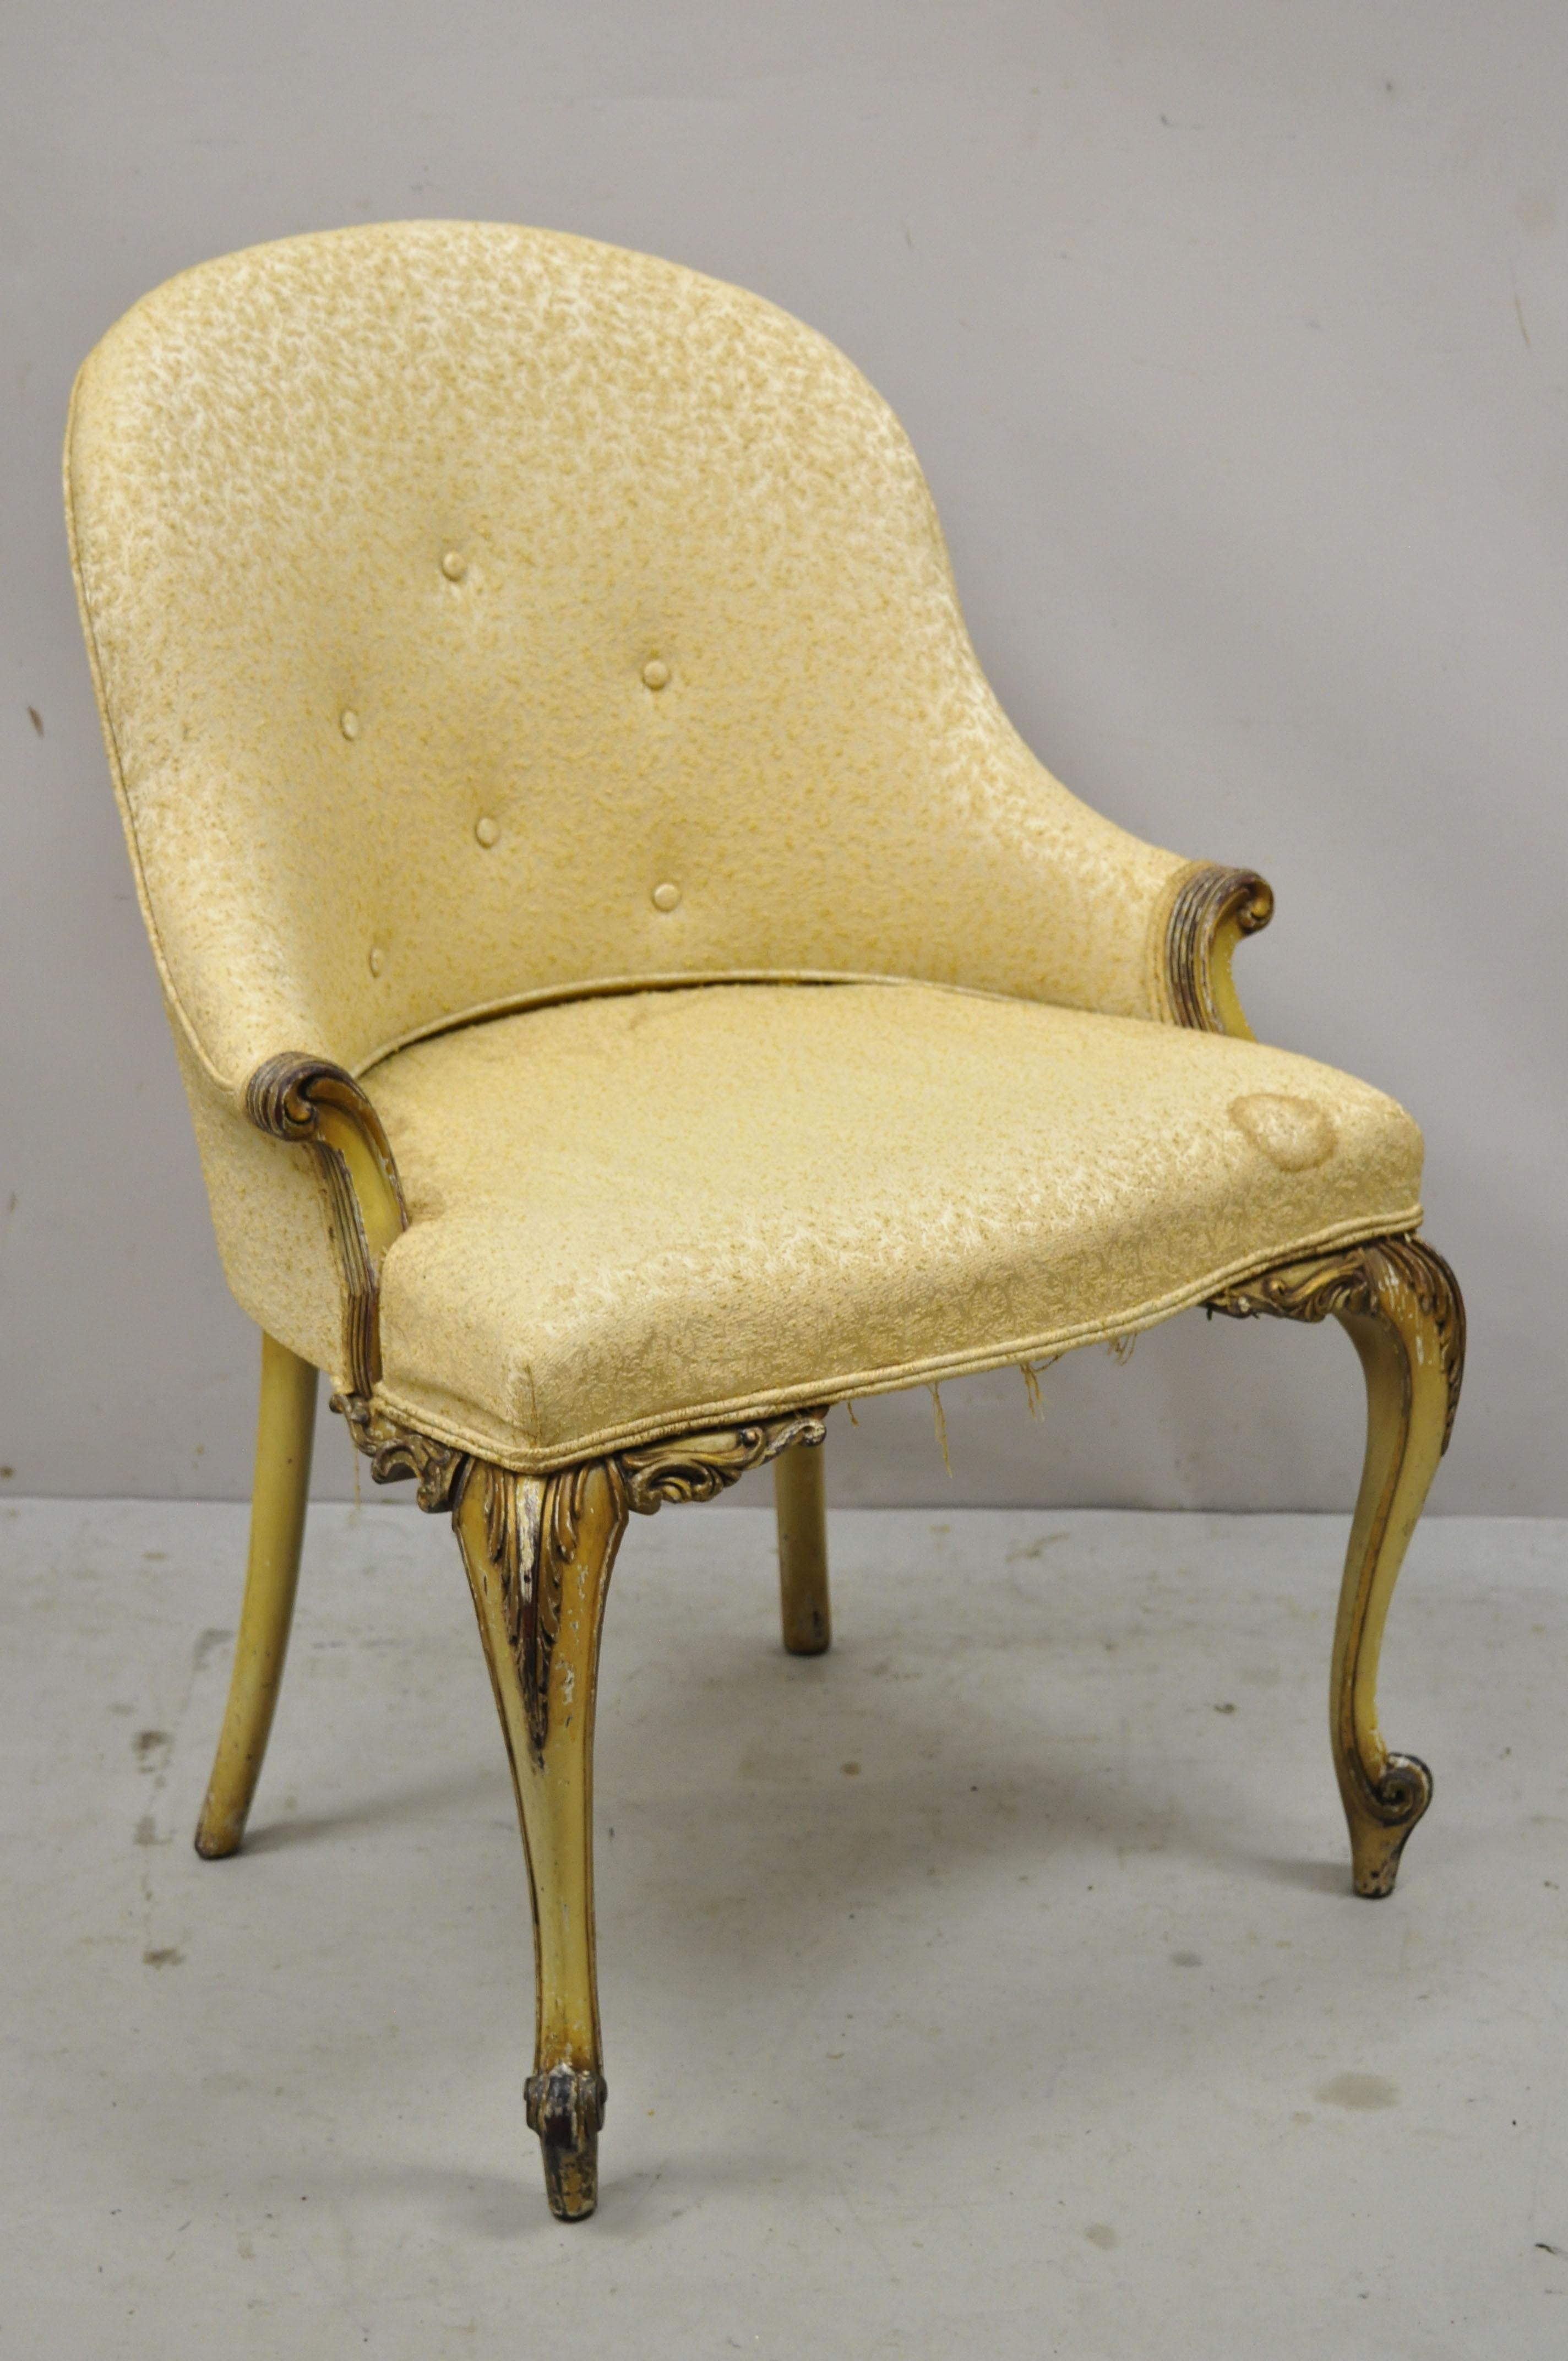 Antique French Louis XV Style upholstered cream painted vanity side chair. Item features solid wood frame, distressed finish, nicely carved details, original label, cabriole legs, very nice antique item, great style and form. Circa Early to Mid